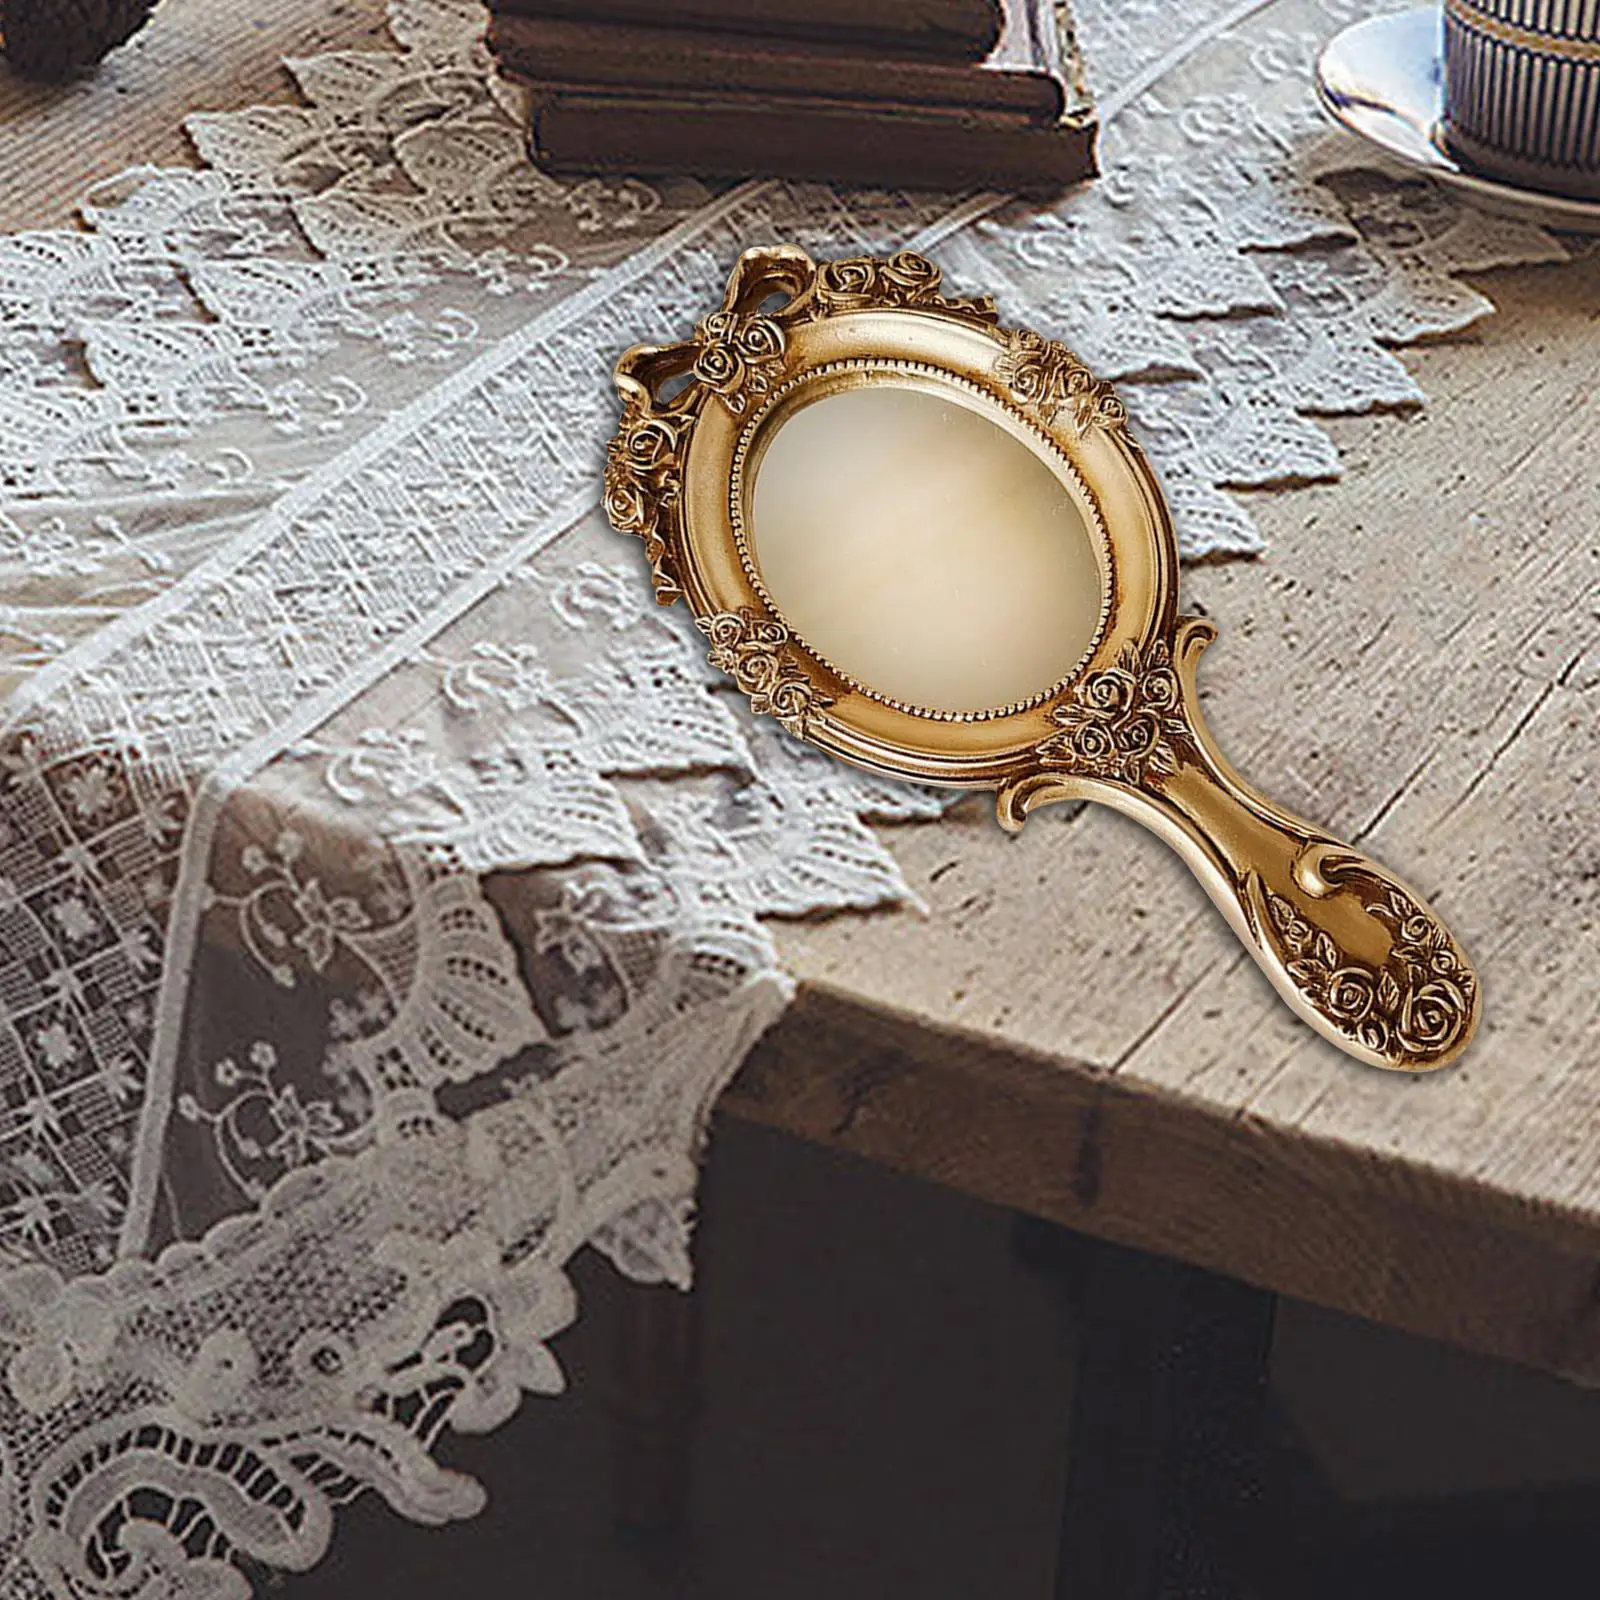 Vintage Hand Mirror Beauty Decorative Makeup Mirror for Travel